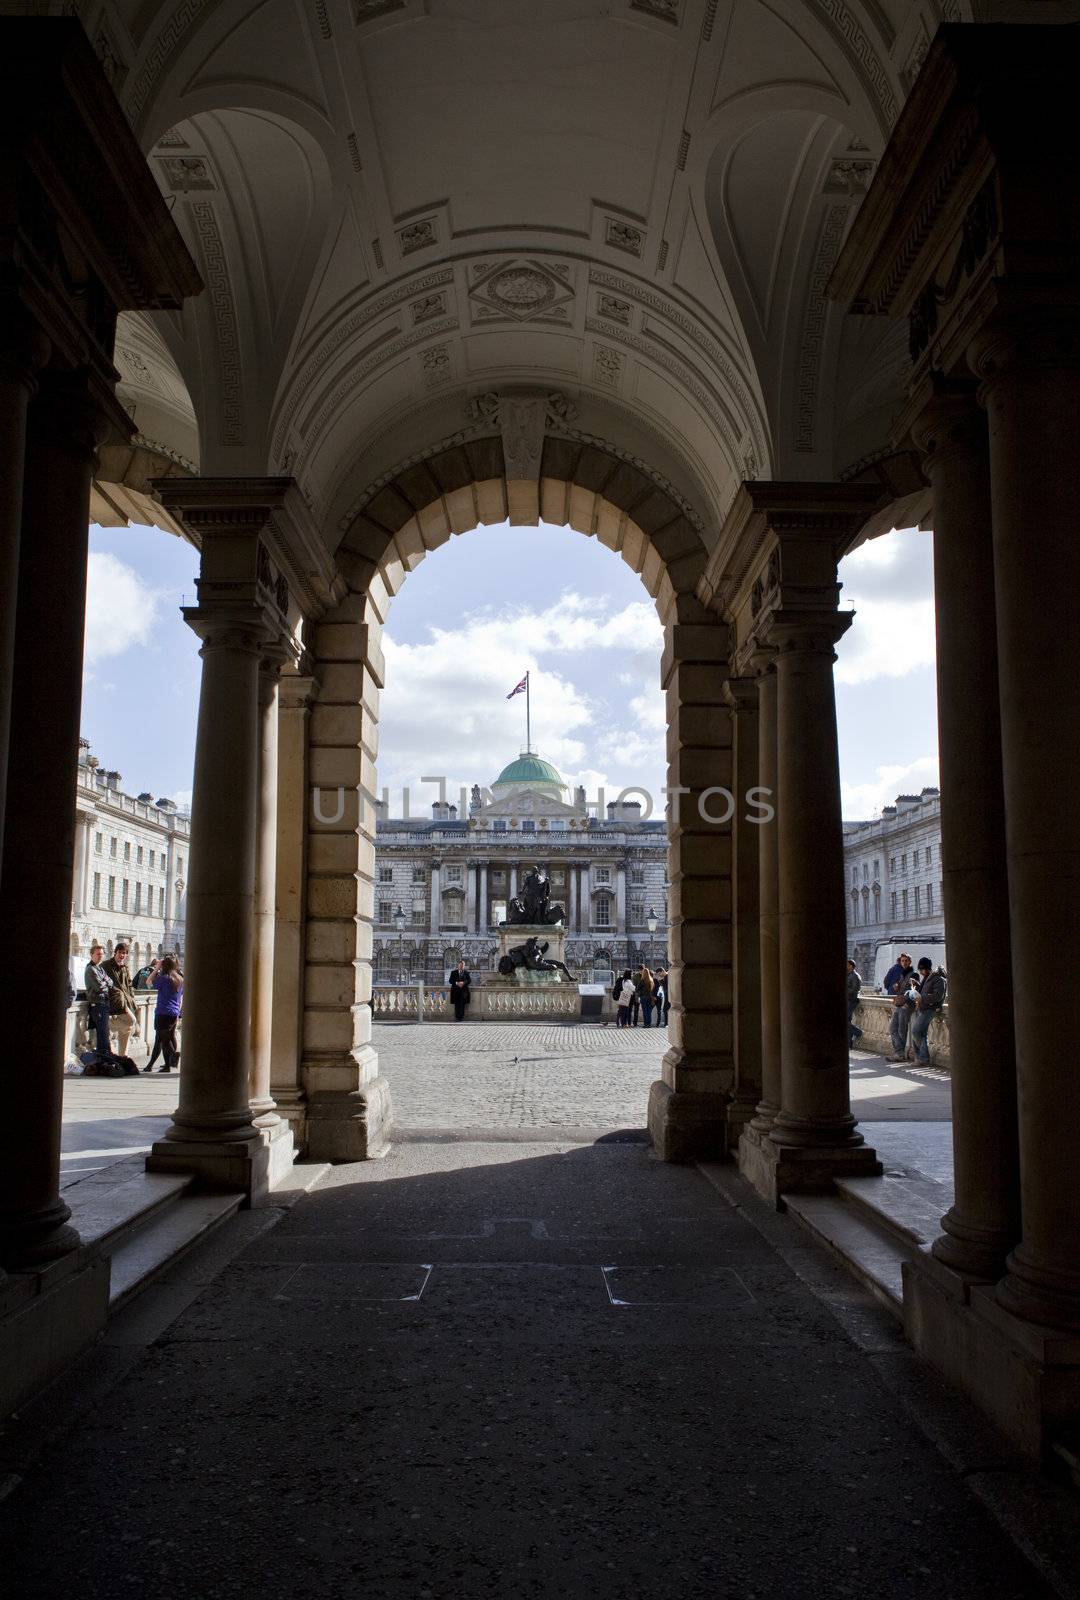 A view of Somerset House in London.